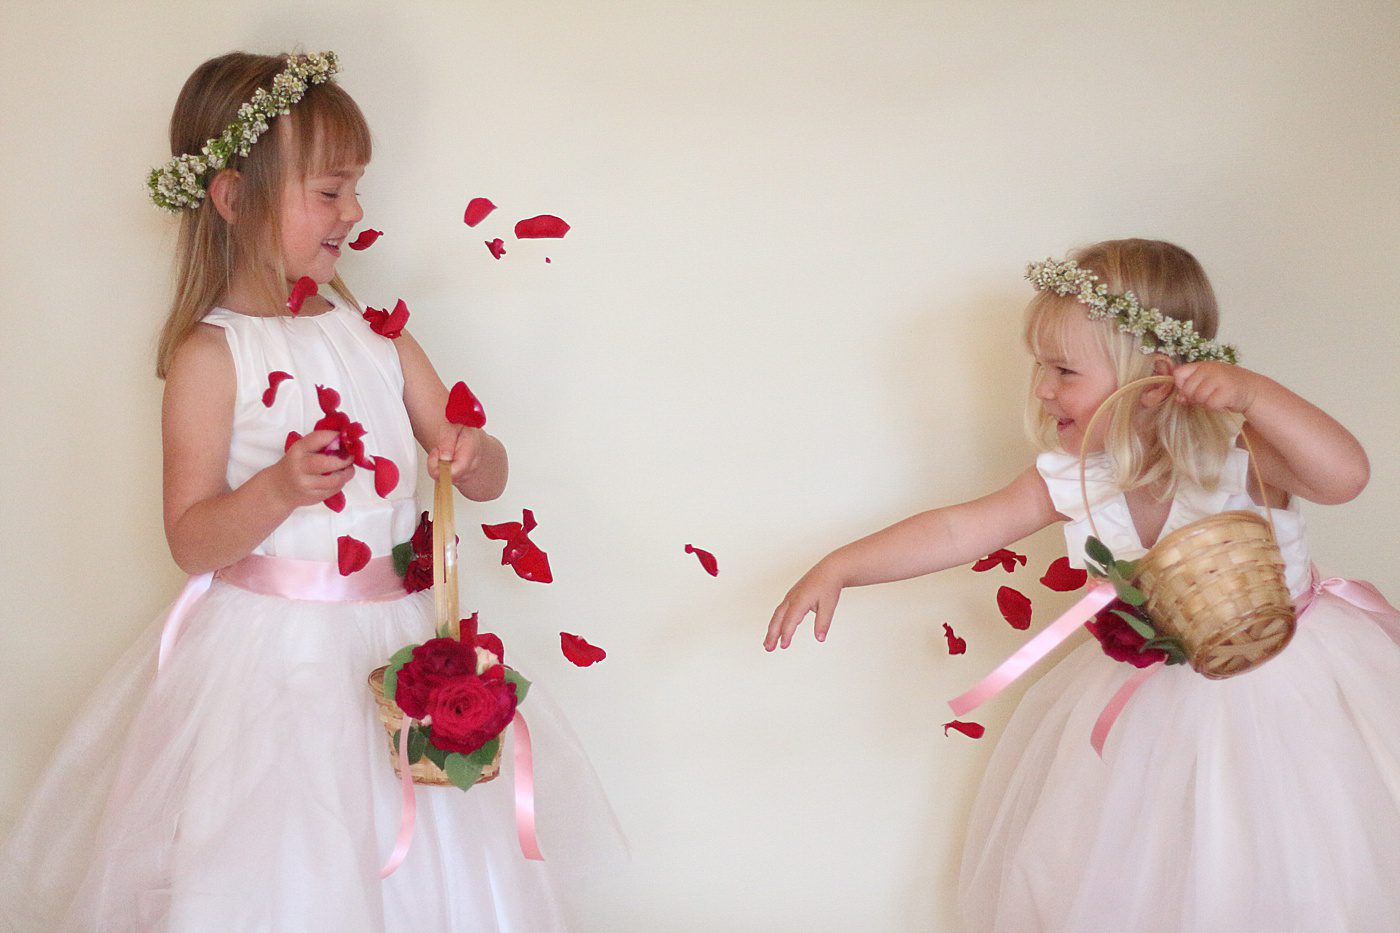 a flower girl thropwing red rose petals at another flower girl